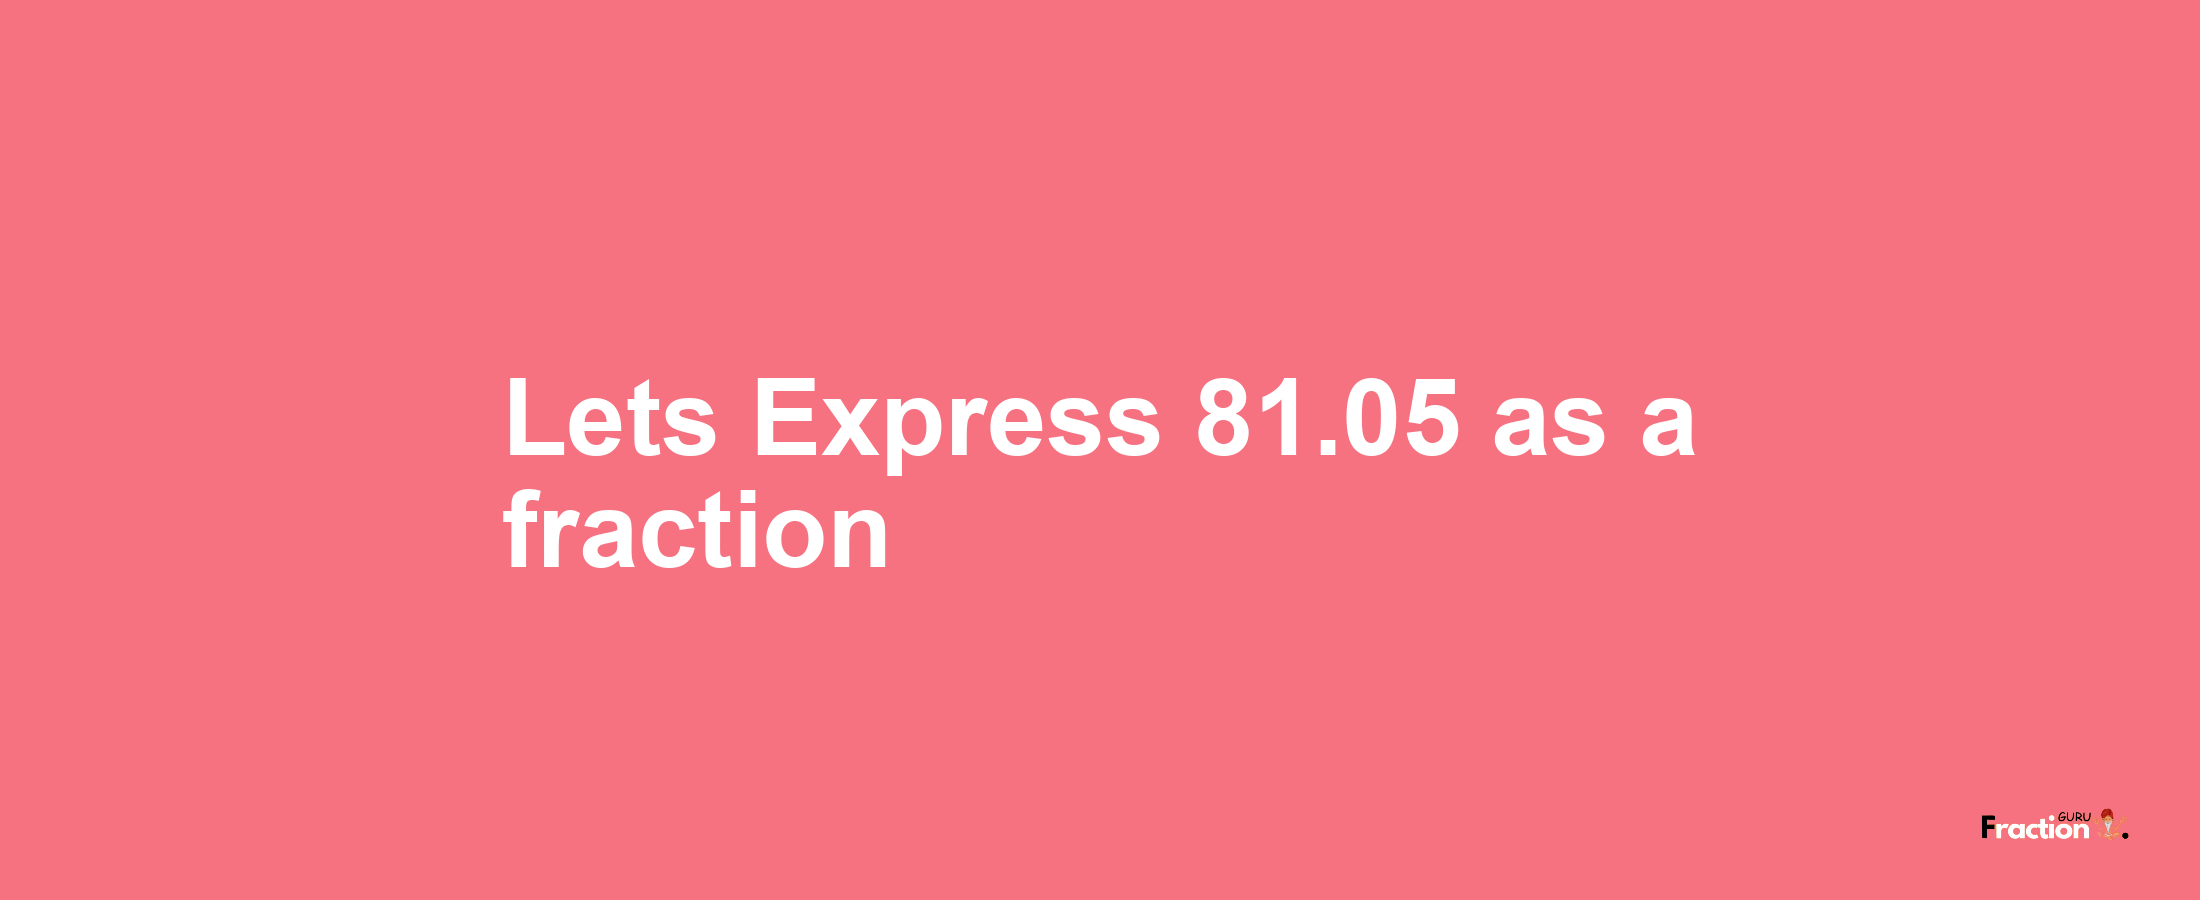 Lets Express 81.05 as afraction